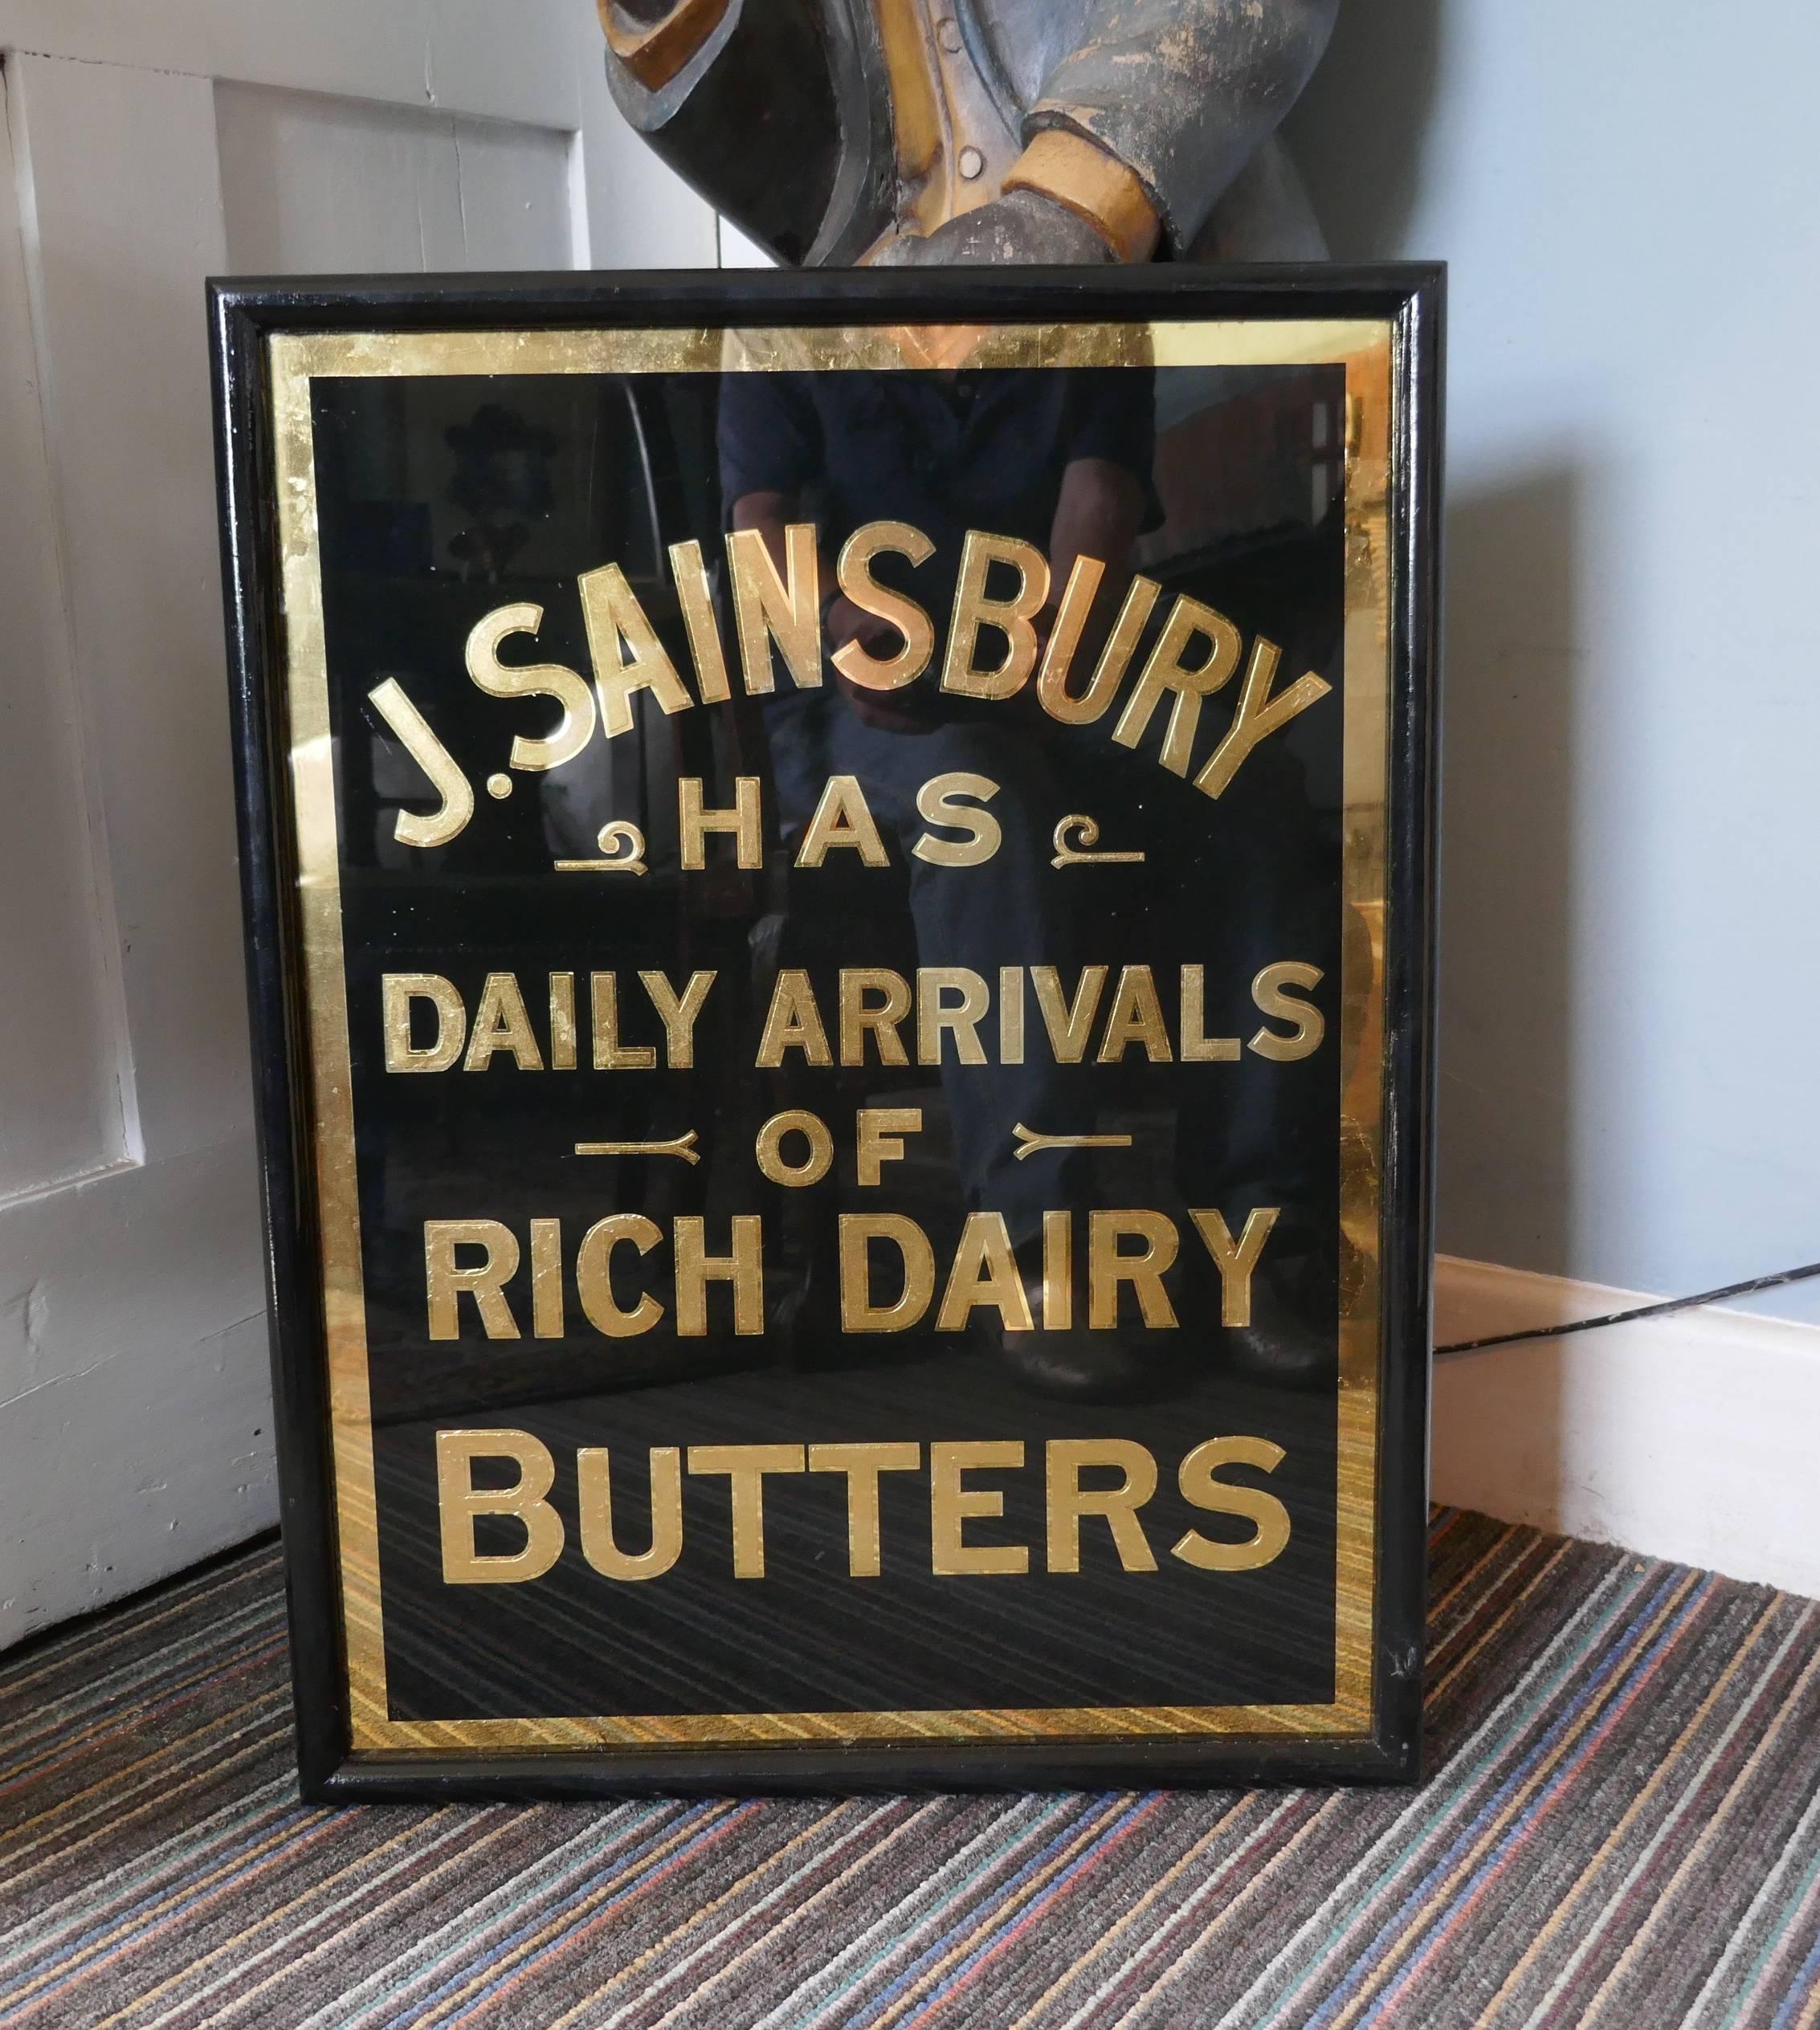 Art Deco J.S.Sainsbury’s butter advertising mirror sign, in black and gold

A great piece, the glass is all original and unrestored and it has been set in a well chosen black wooden frame
The sign tells us that J.S.Sainsbury has daily arrivals of